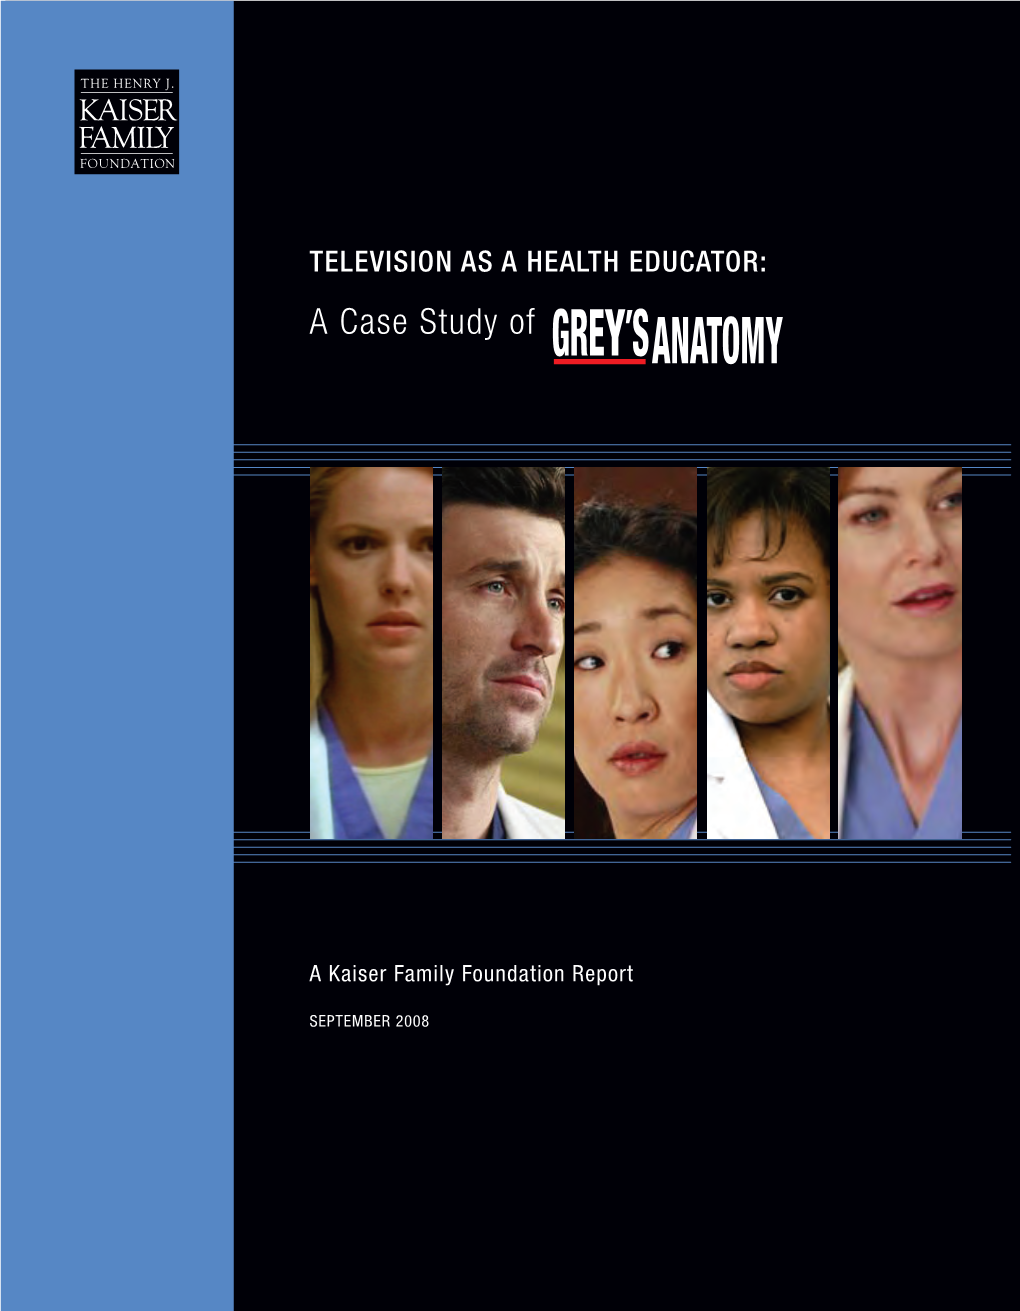 Television As a Health Educator: a Case Study of Grey's Anatomy